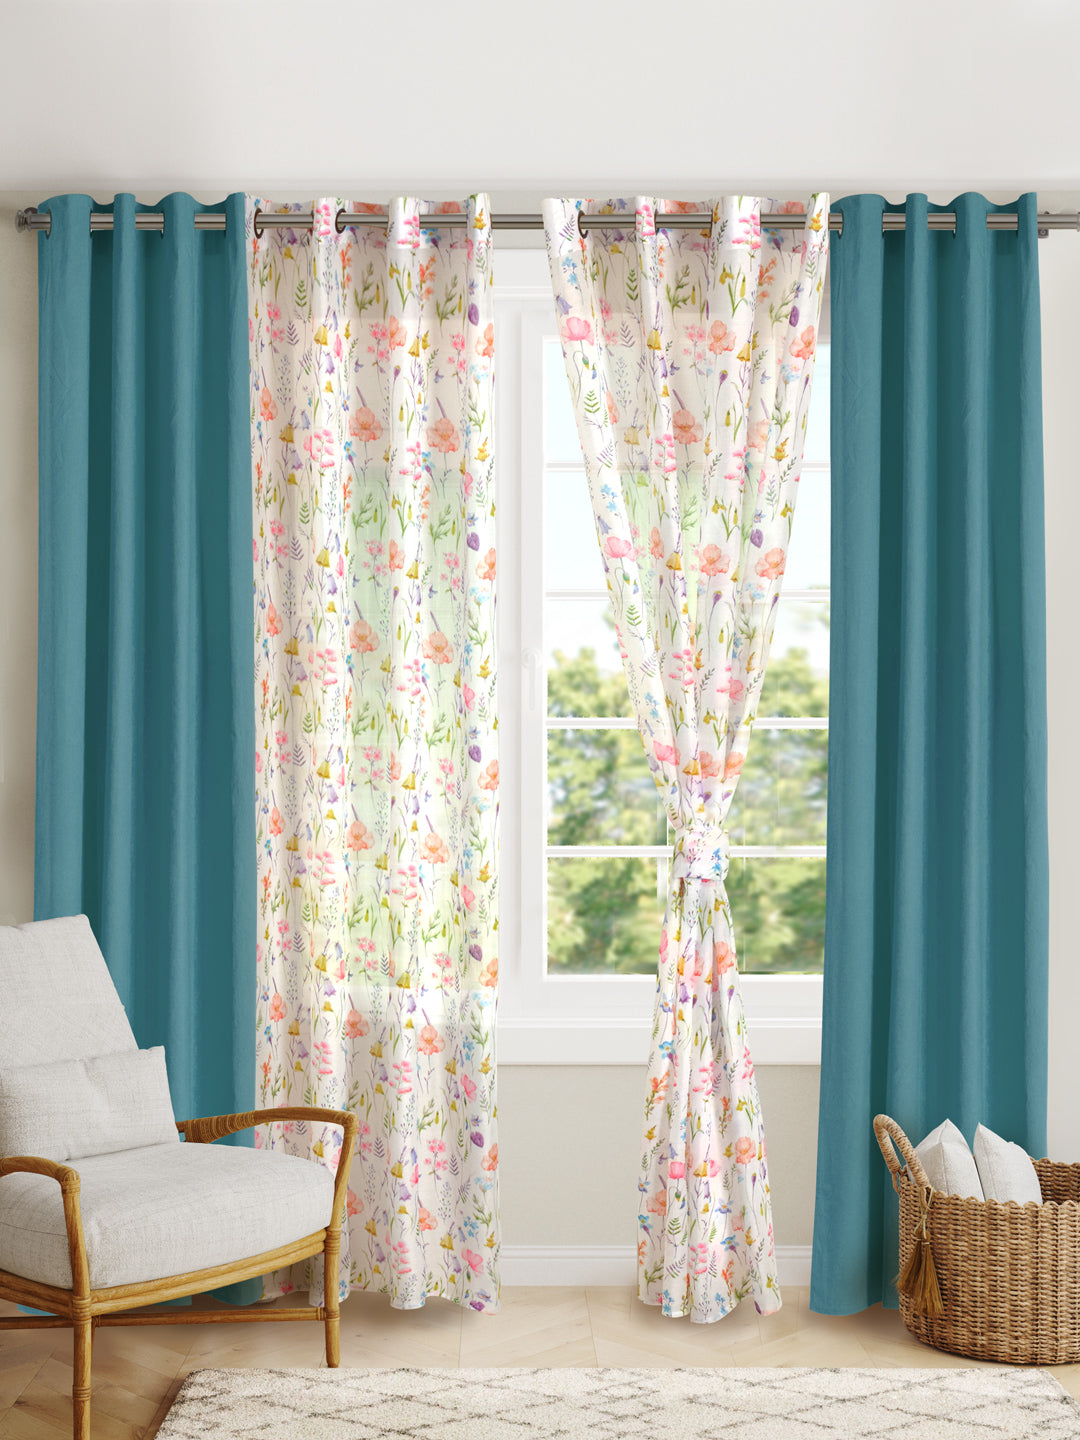 Blanc9 Set Of 4 Floral Garden Printed With Blue Plain 7Ft. Curtain